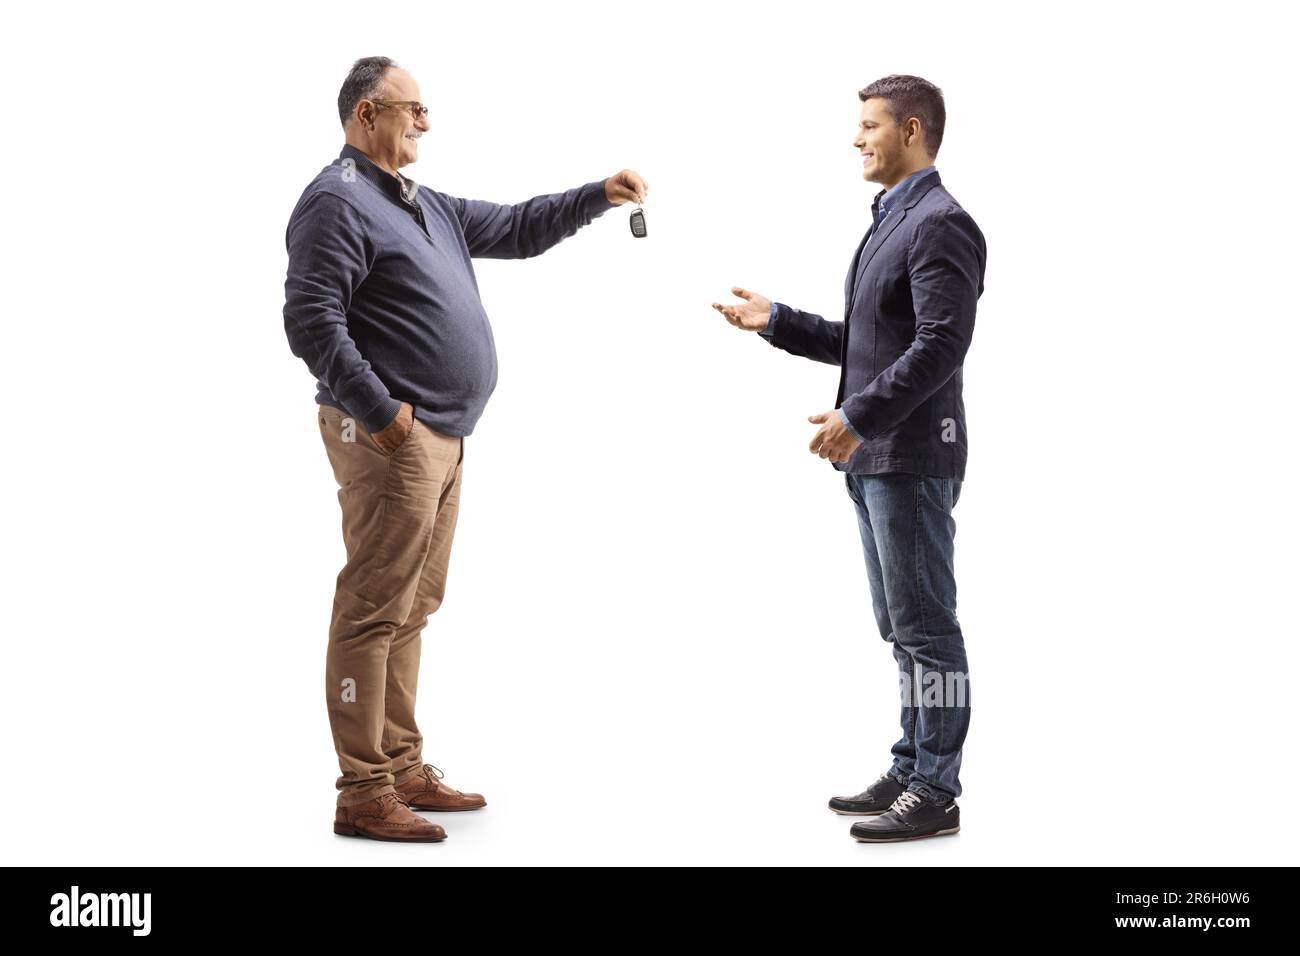 Mature man handing car keys to a younger man isolated on white background Stock Photo